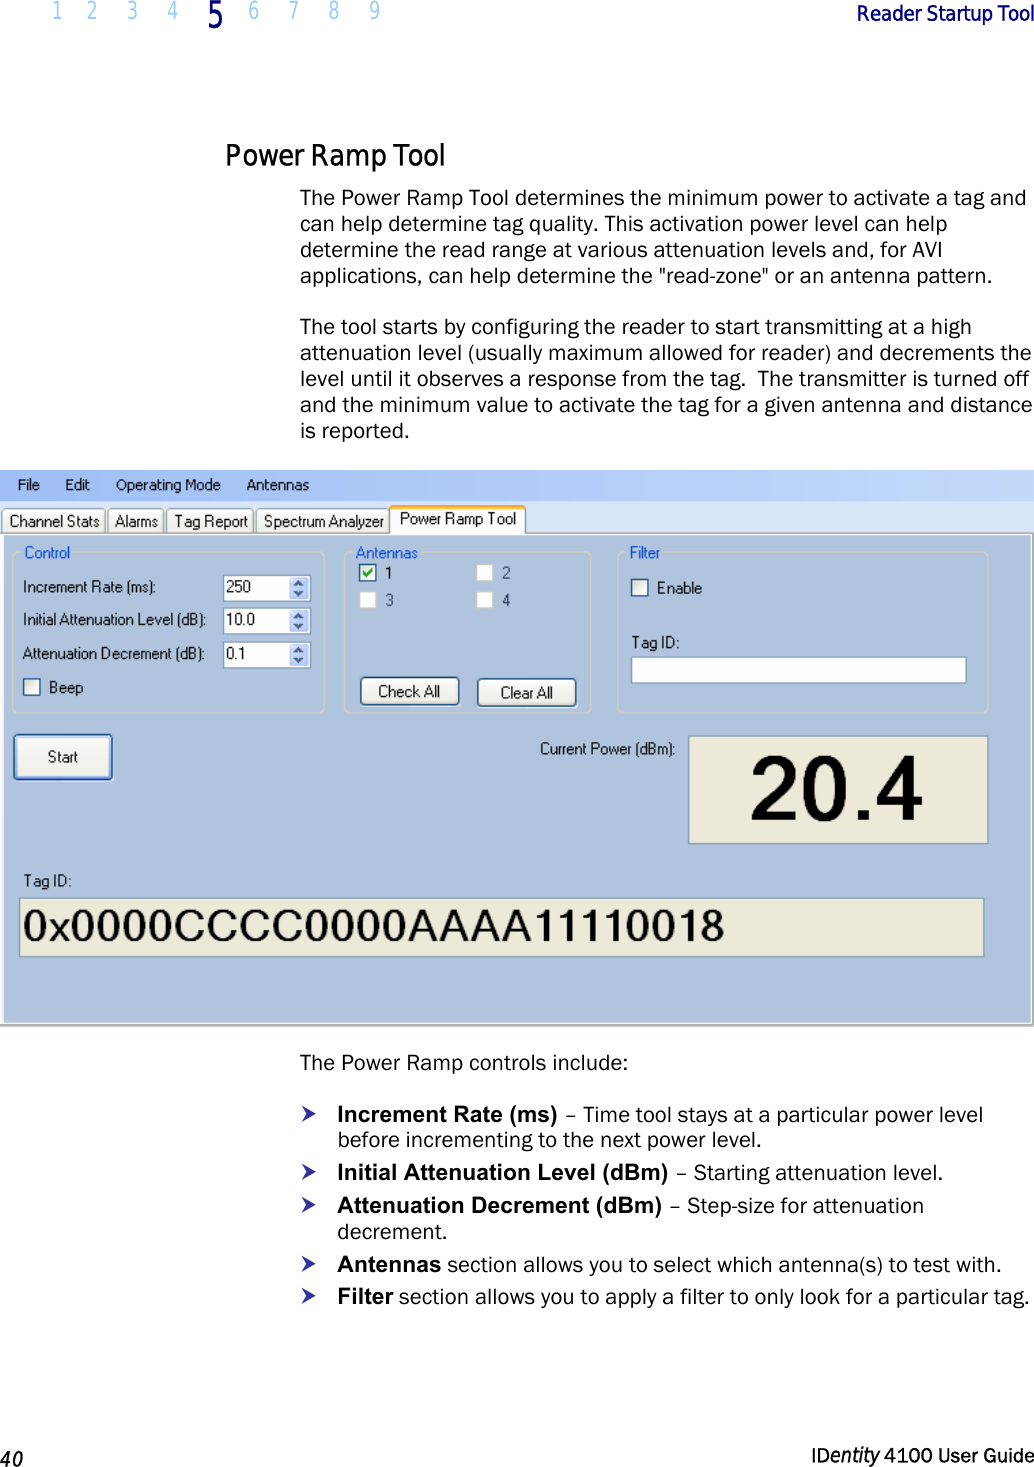  1 2  3  4 5 6 7 8 9       Reader Startup Tool   40  IDentity 4100 User Guide  Power Ramp Tool The Power Ramp Tool determines the minimum power to activate a tag and can help determine tag quality. This activation power level can help determine the read range at various attenuation levels and, for AVI applications, can help determine the &quot;read-zone&quot; or an antenna pattern. The tool starts by configuring the reader to start transmitting at a high attenuation level (usually maximum allowed for reader) and decrements the level until it observes a response from the tag.  The transmitter is turned off and the minimum value to activate the tag for a given antenna and distance is reported.  The Power Ramp controls include: h Increment Rate (ms) – Time tool stays at a particular power level before incrementing to the next power level. h Initial Attenuation Level (dBm) – Starting attenuation level. h Attenuation Decrement (dBm) – Step-size for attenuation decrement. h Antennas section allows you to select which antenna(s) to test with. h Filter section allows you to apply a filter to only look for a particular tag.  